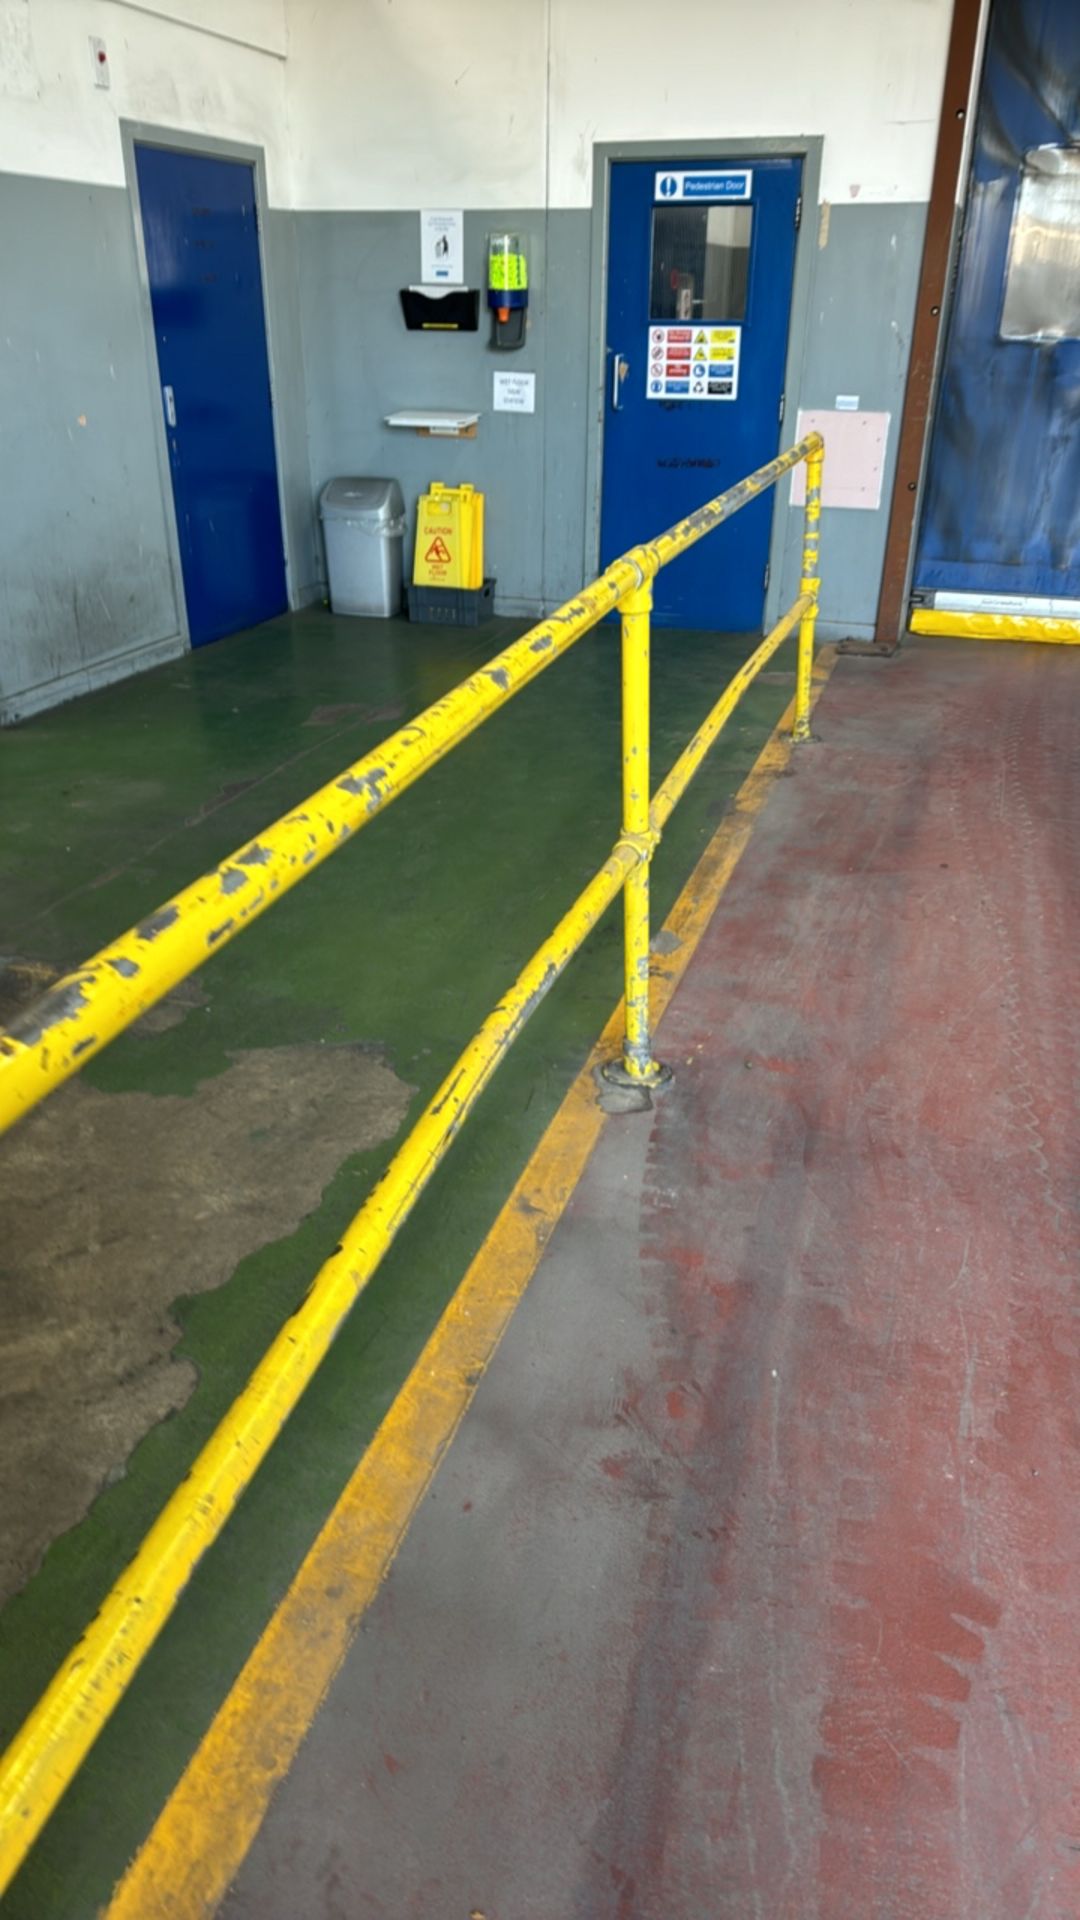 7.5 Meters of Yellow Metal Safety Barriers - Image 4 of 4